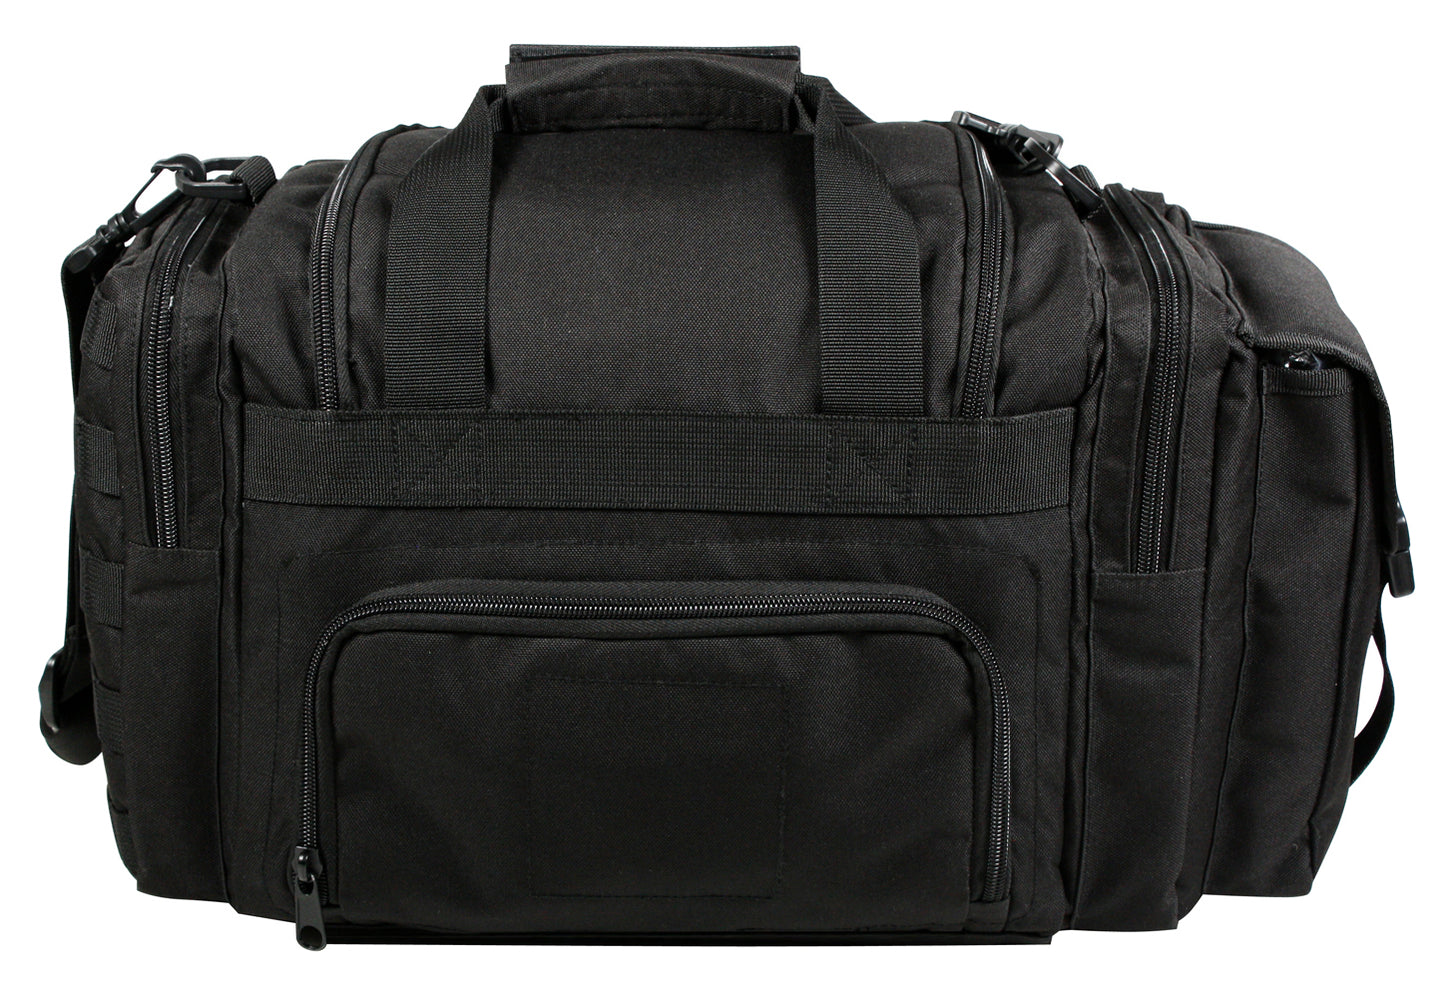 Black Concealed Carry Bag - Law Enforcement Security Tactical MOLLE Gear Bags